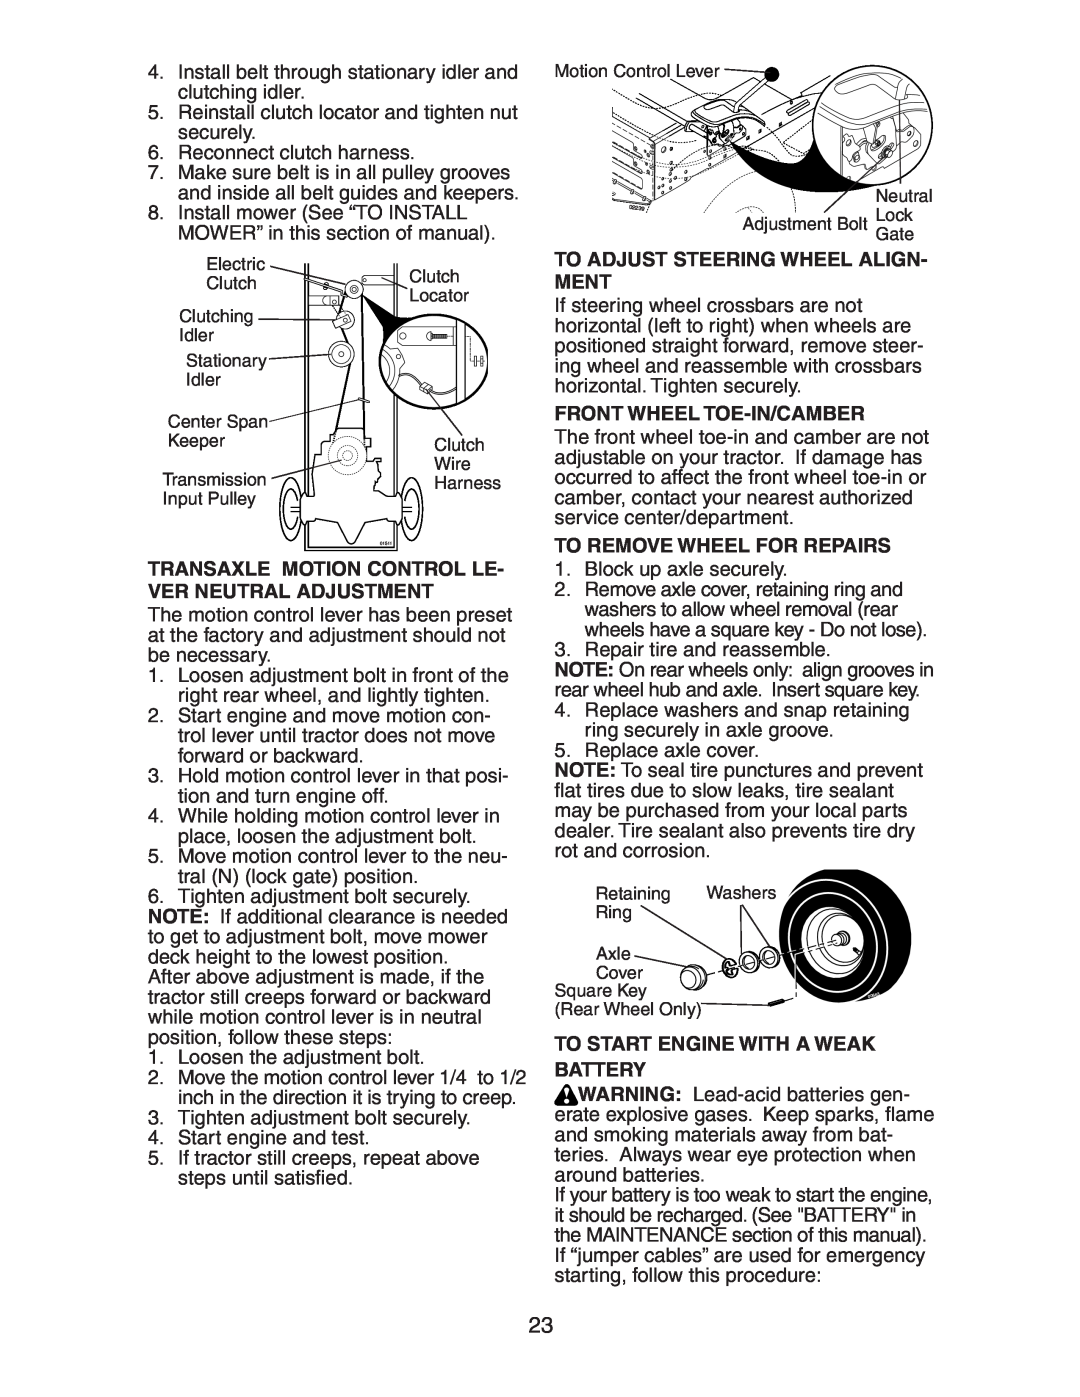 Poulan CO185H42STC manual To Adjust Steering Wheel Align- Ment, Front Wheel Toe-In/Camber, To Remove Wheel For Repairs 